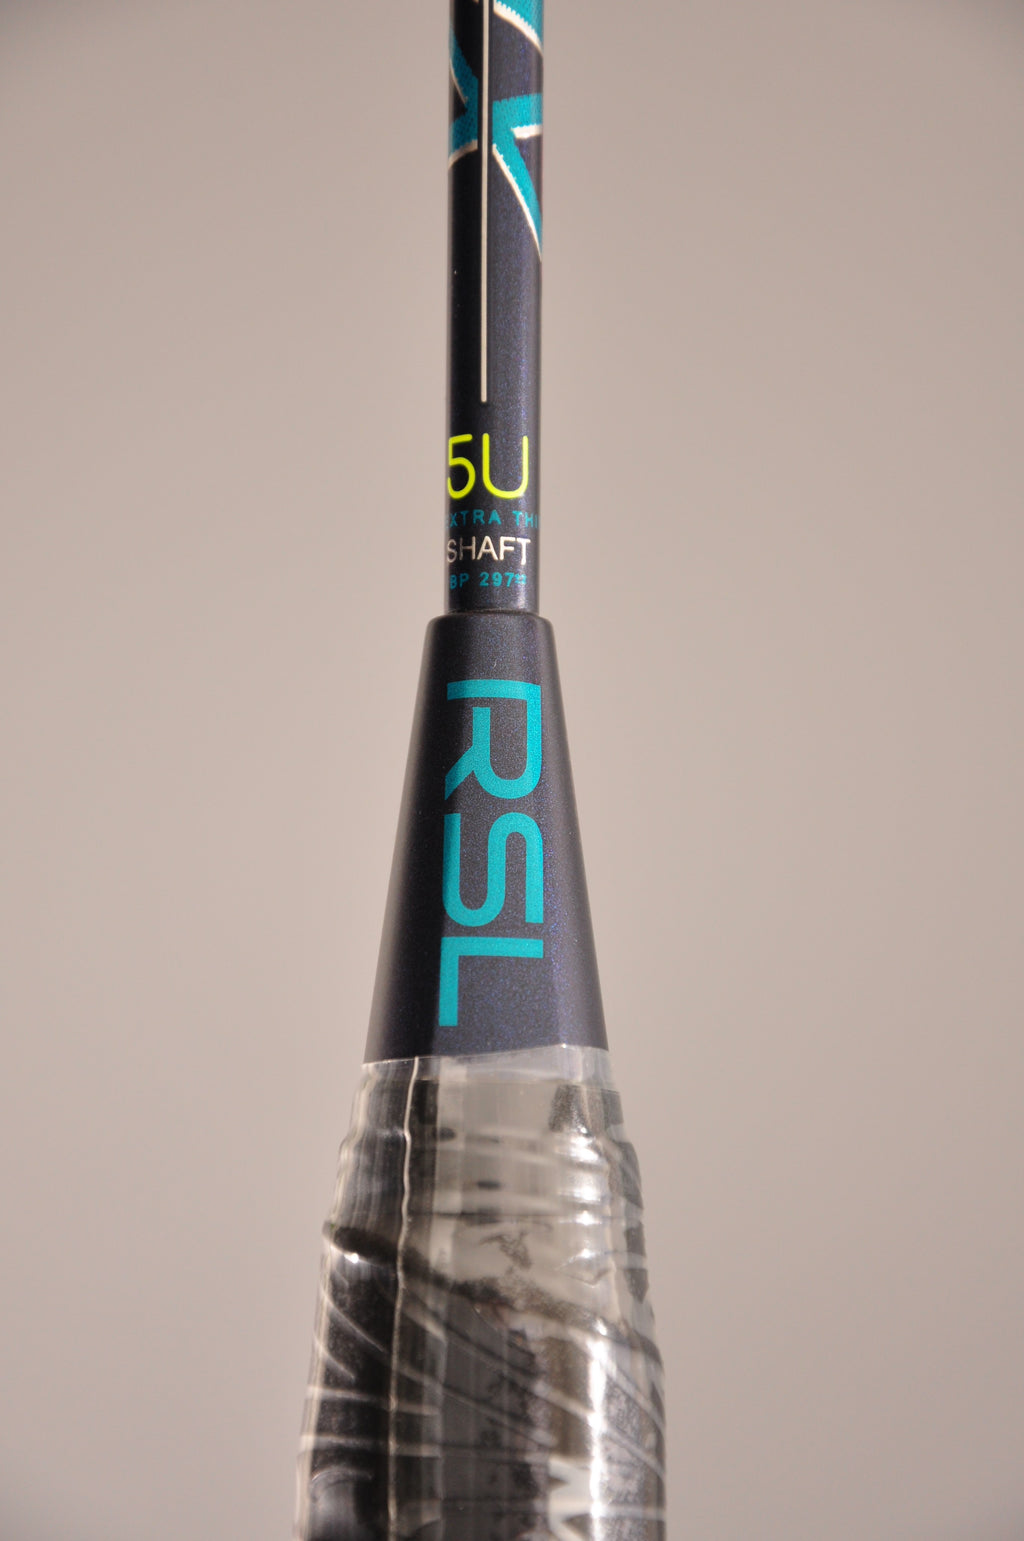 RSL Helix H7 badminton racket, Free shorts, grip and string. - badminton racket review